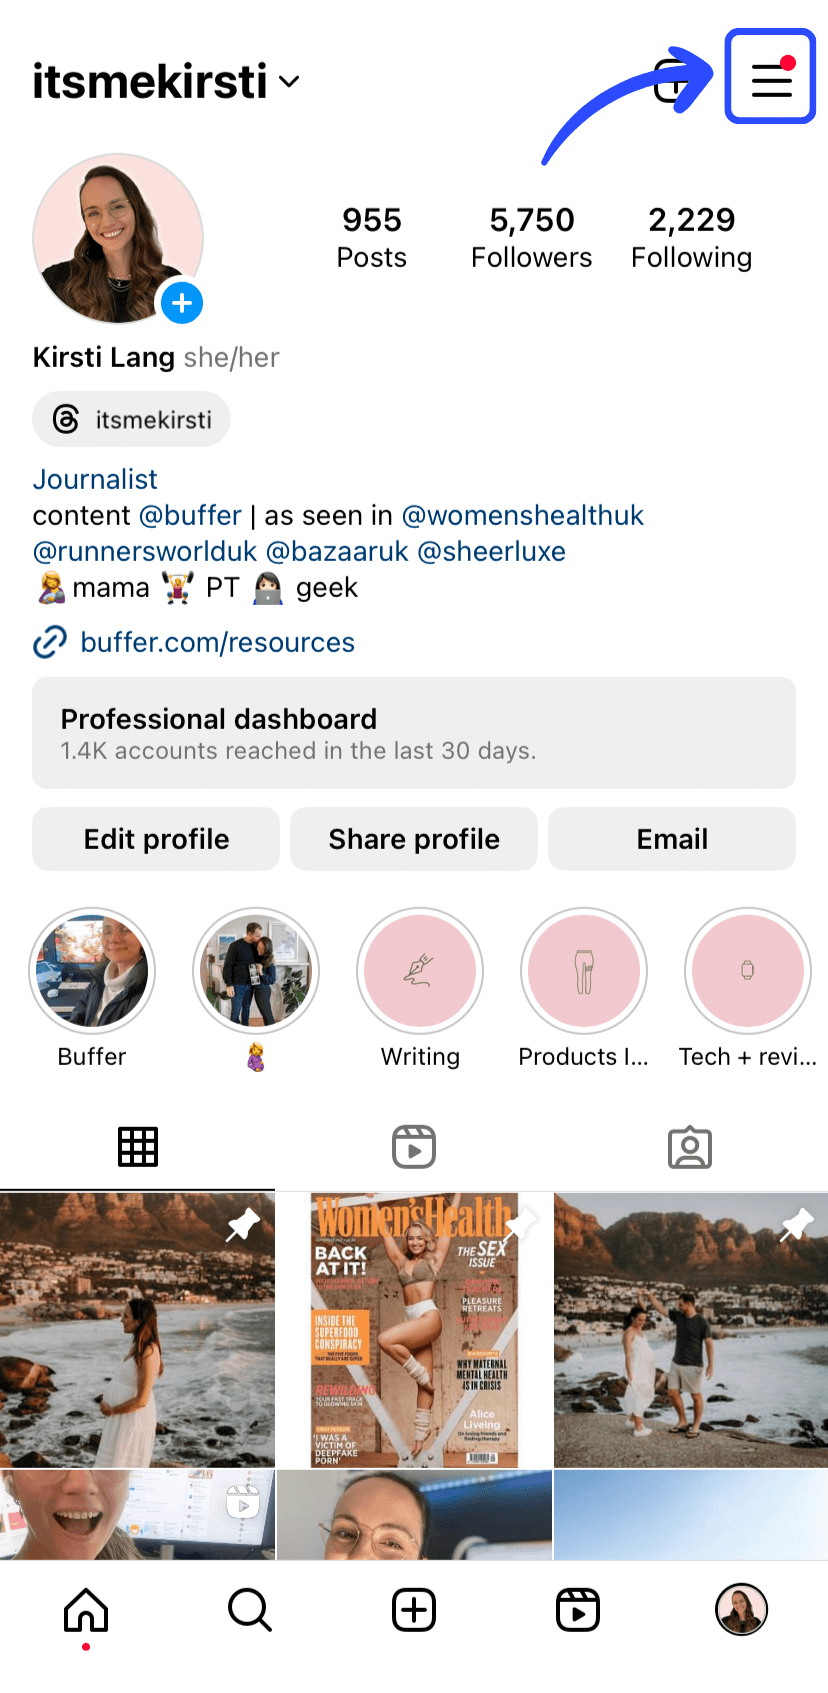 How to Get Verified on Instagram and Get the Blue Checkmark